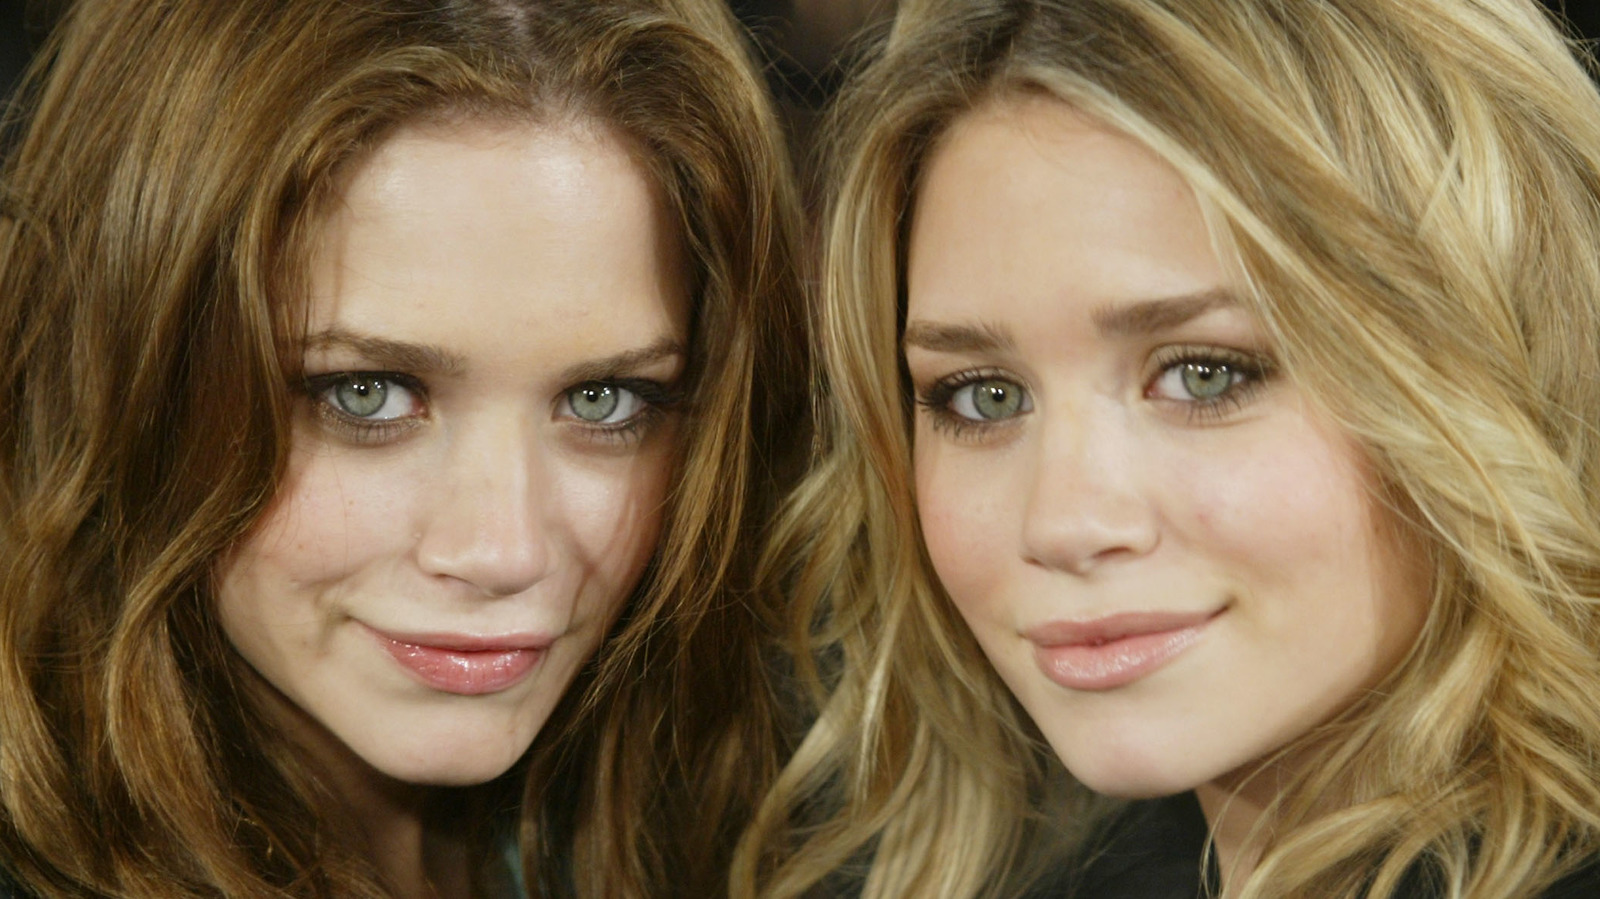 What Really Happened To The Olsen Twins?